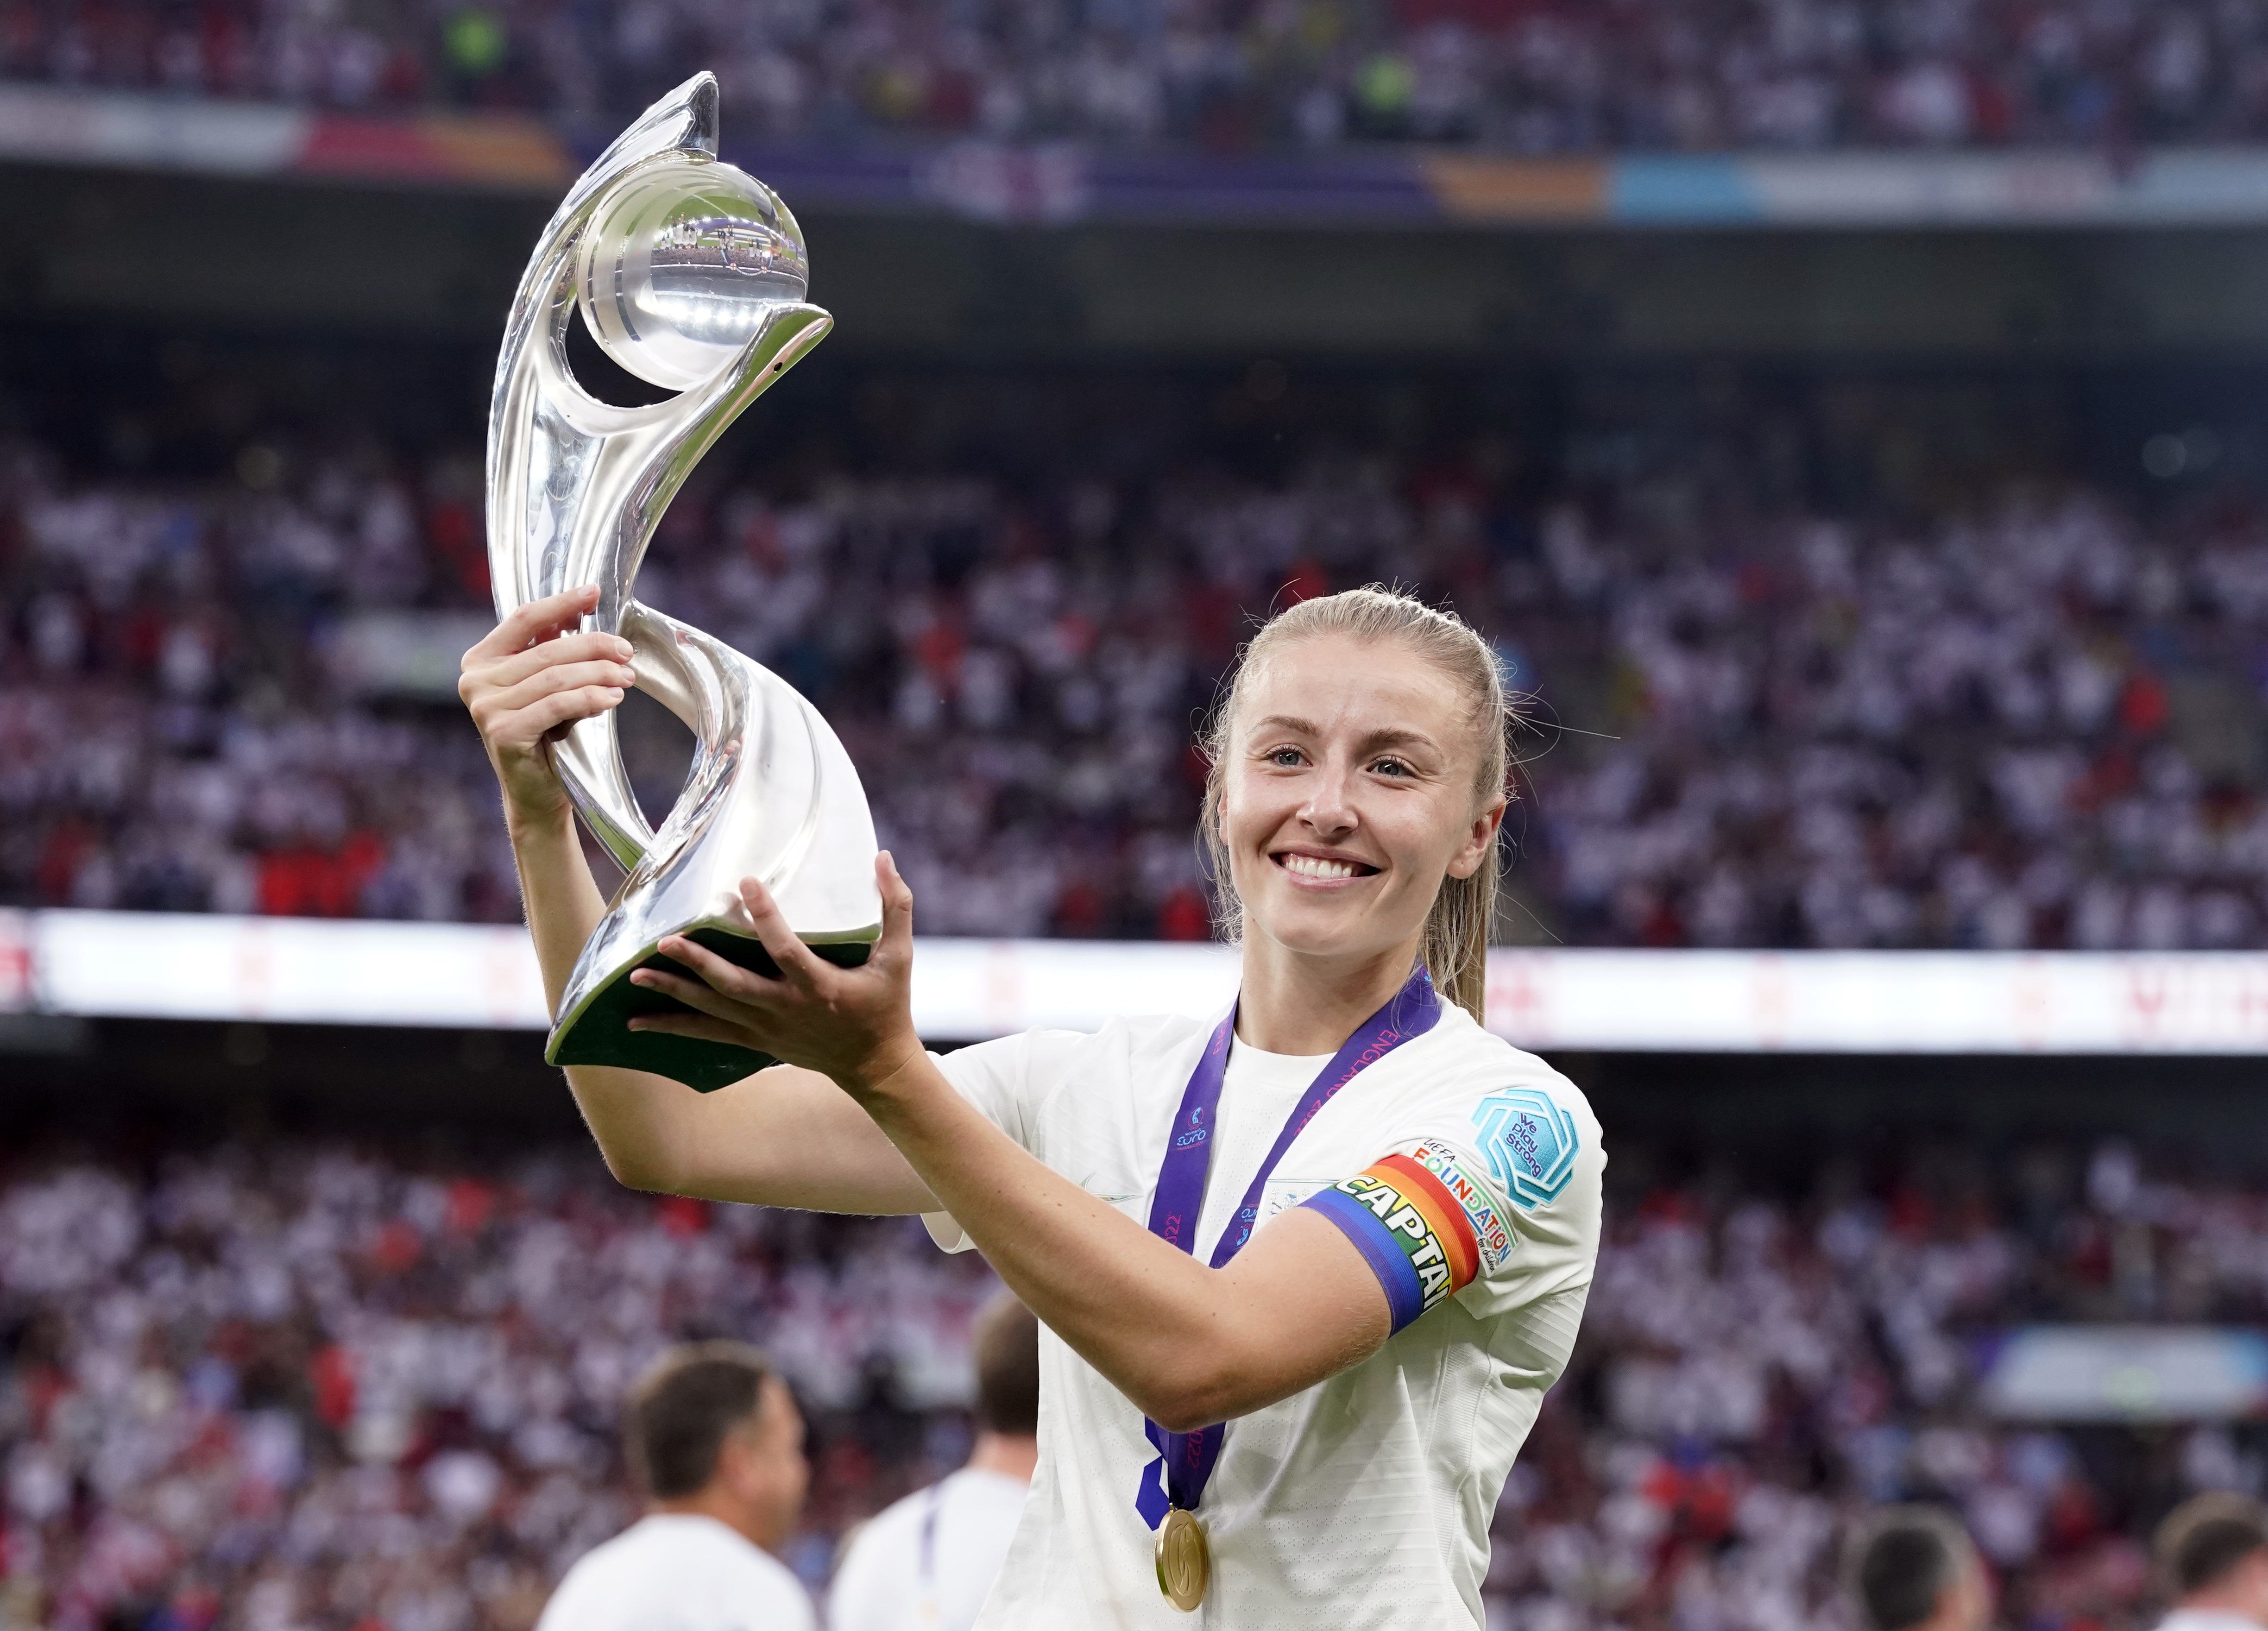 Leah Williamson captained England to Euro 2022 success and a fairy-tale ending at Wembley in the summer